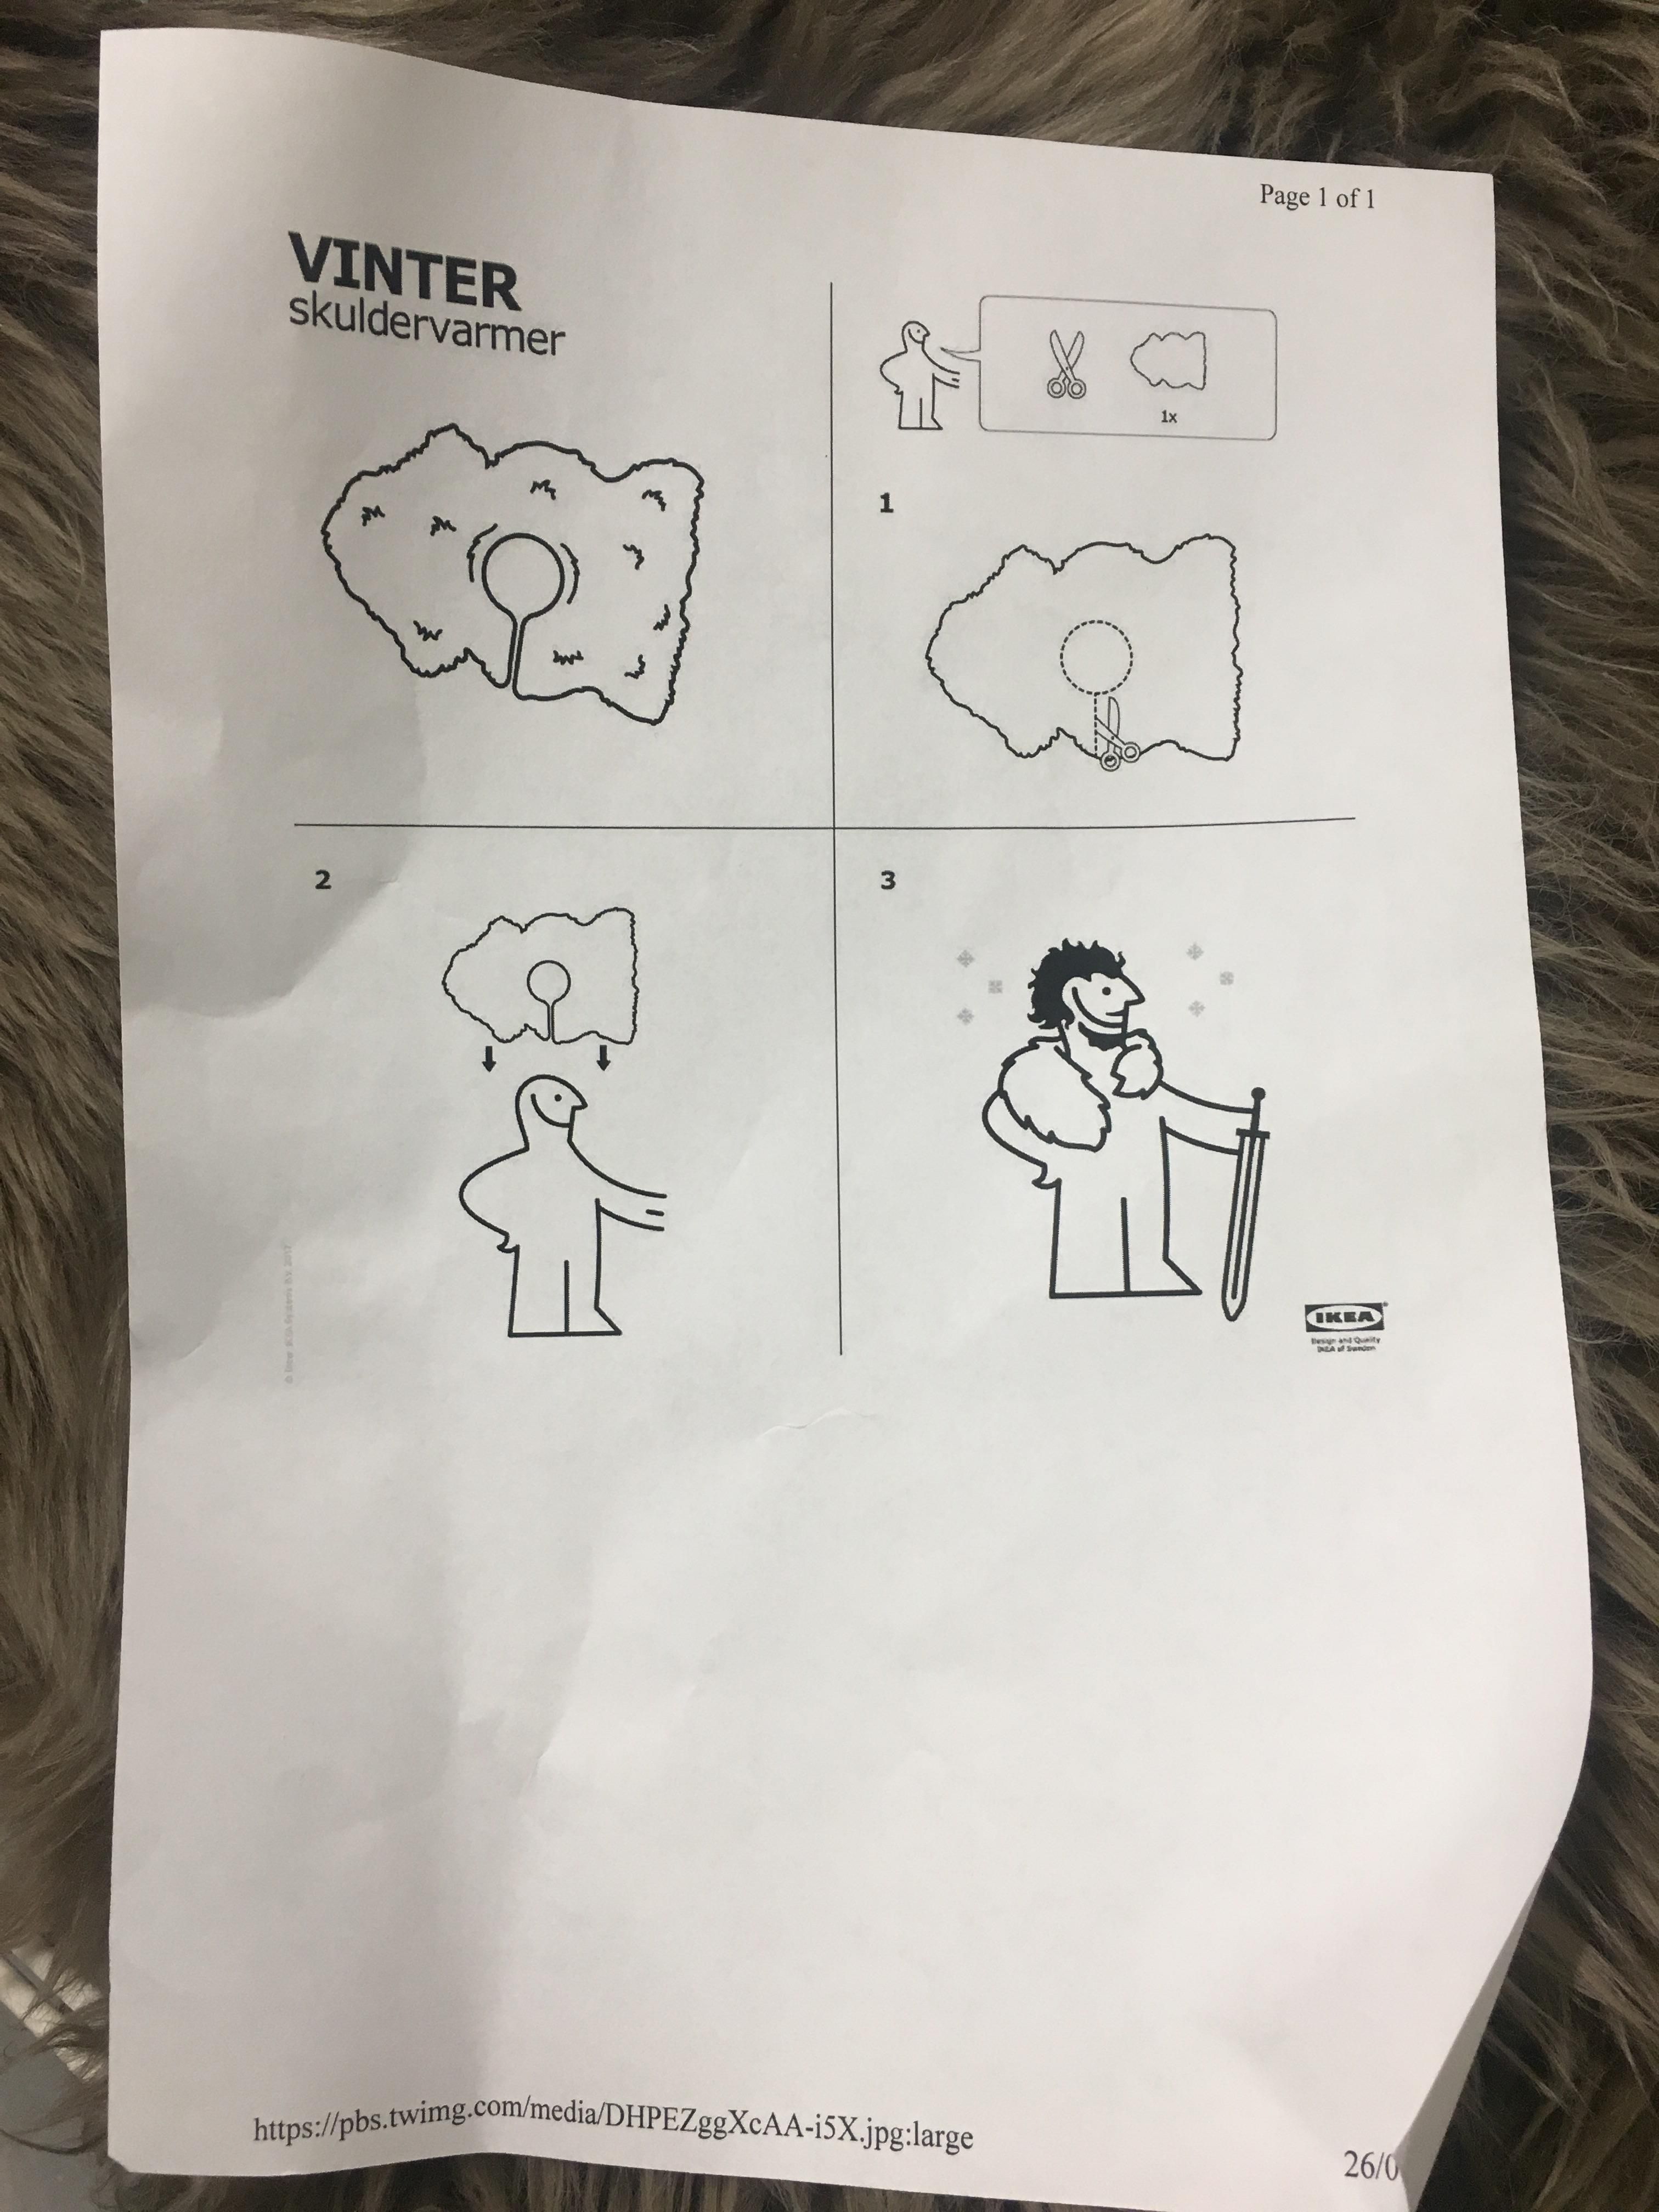 Found these instructions next to the fur rugs in Ikea Glasgow